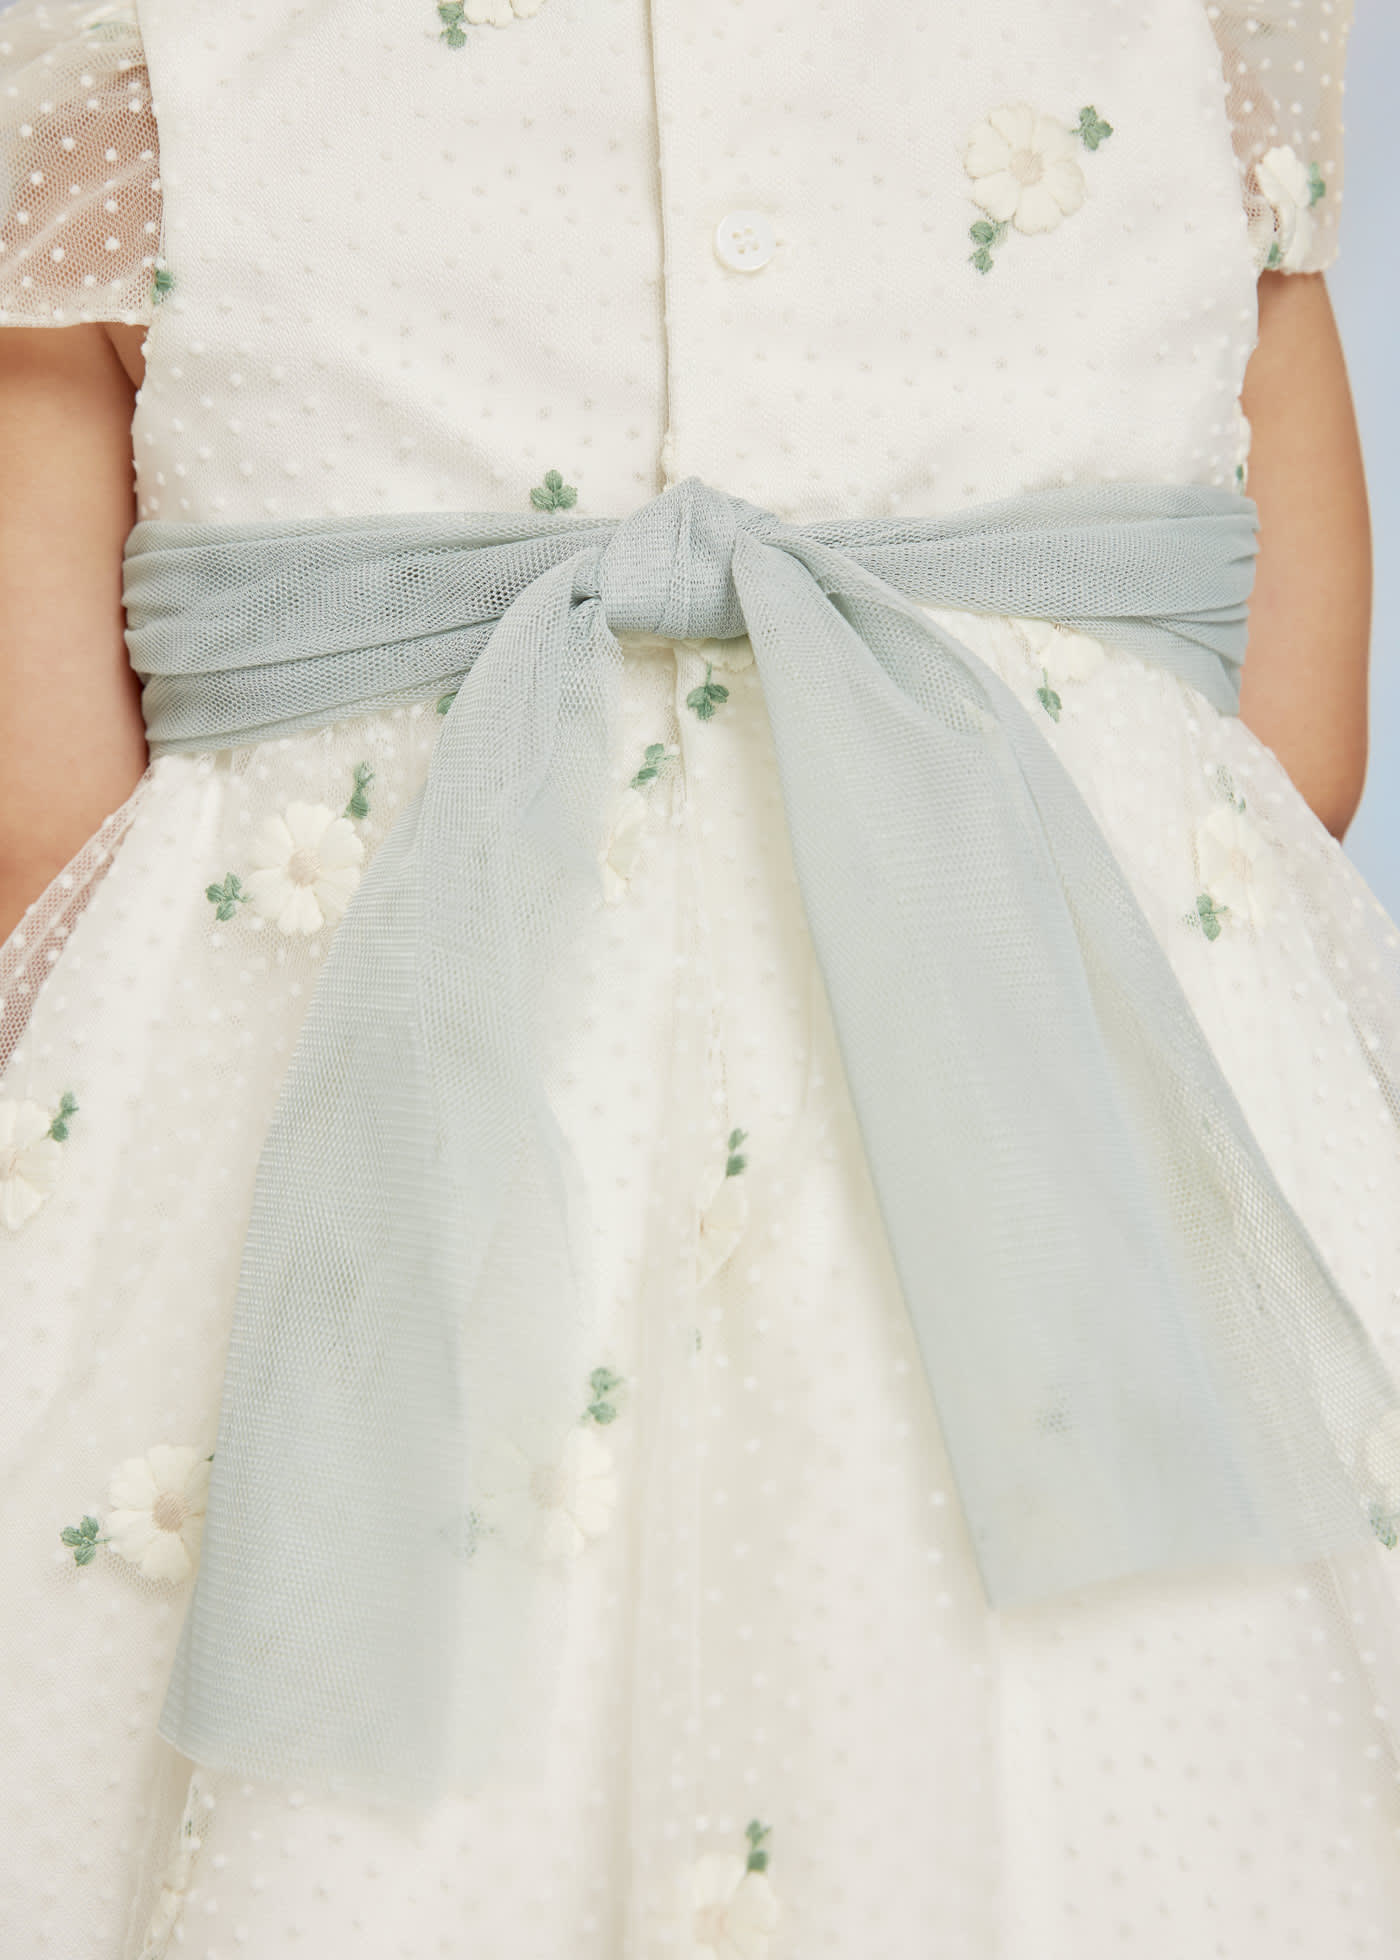 Tulle embroidered dress baby